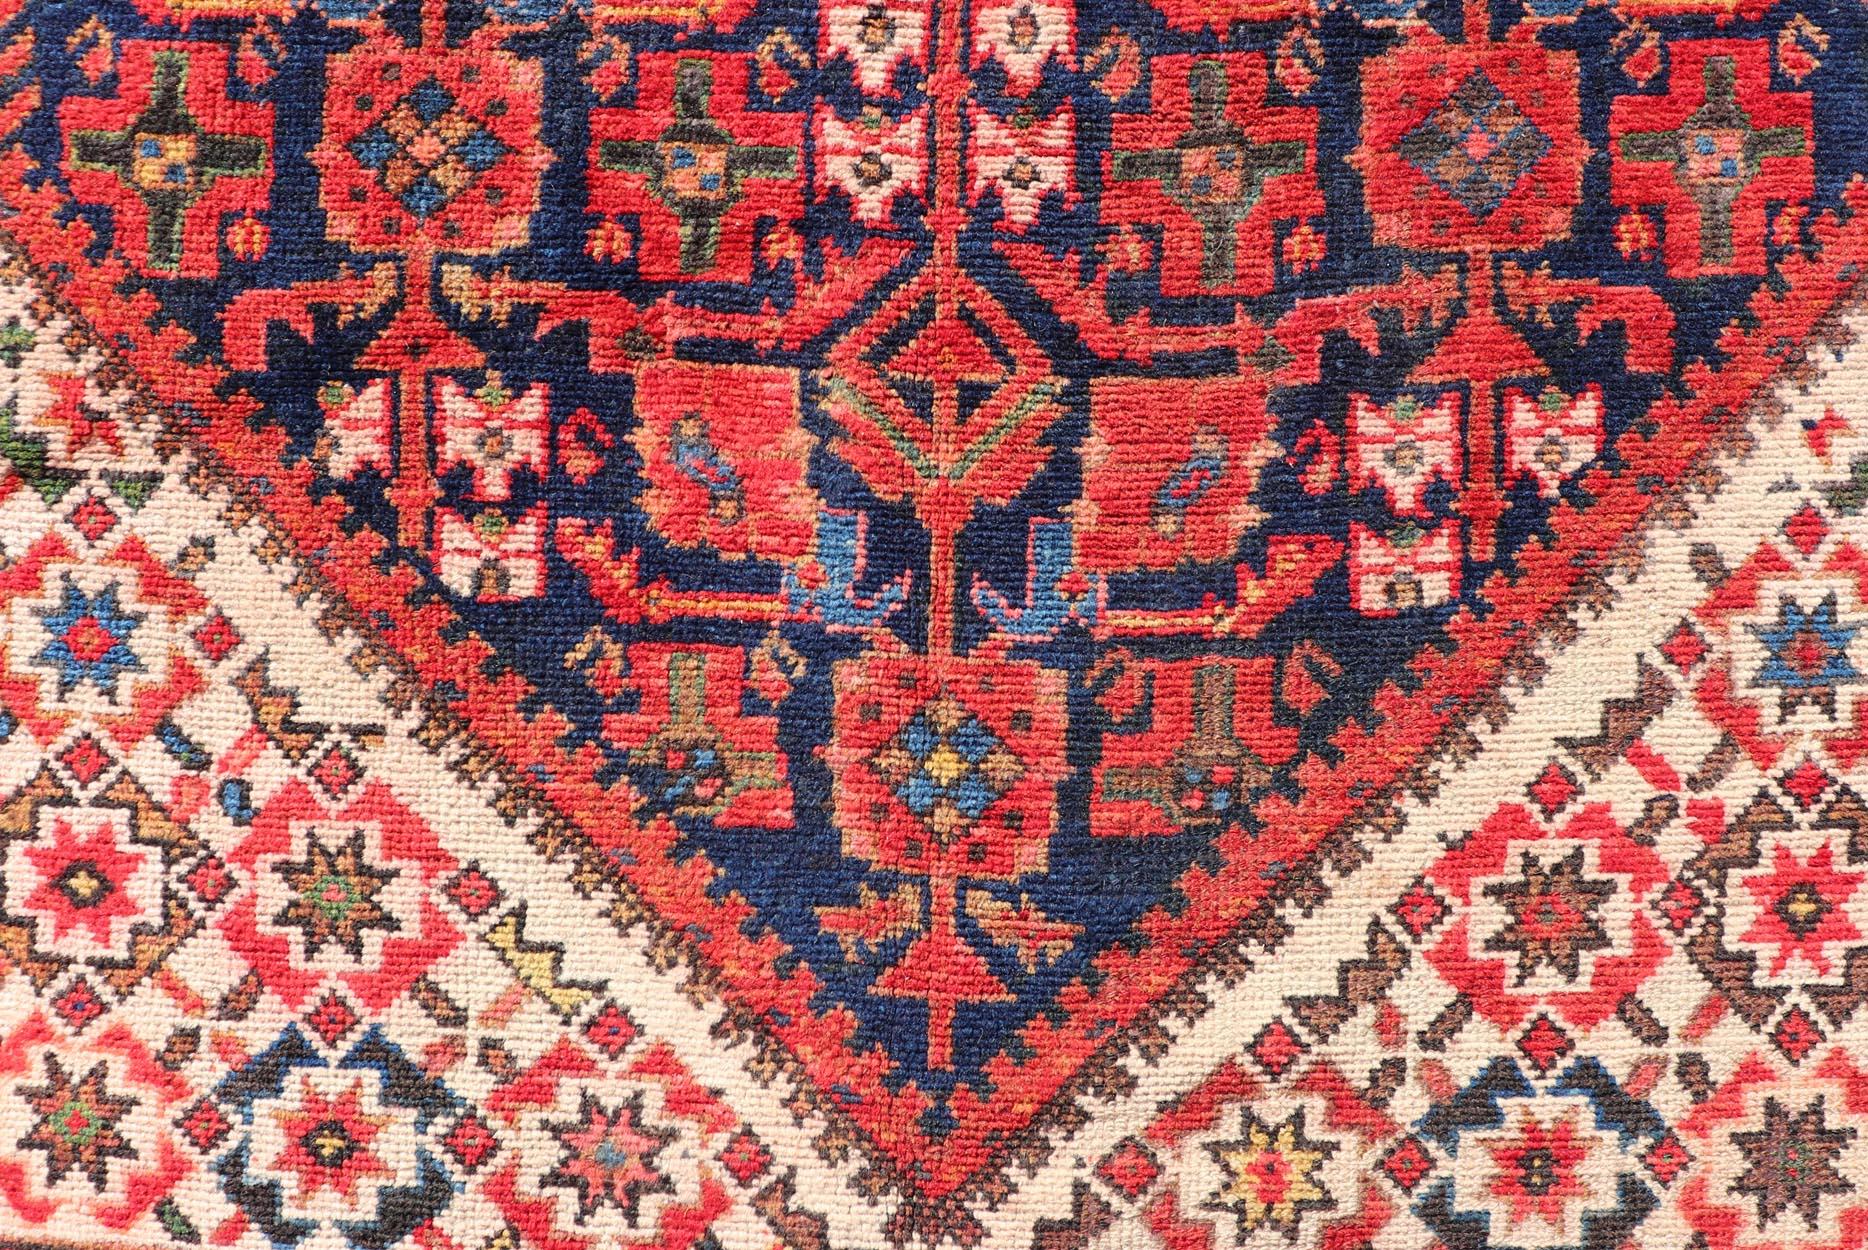 Malayer Gallery runner from Persia with geometric floral central field design, in red and blue with all over design. Keivan Woven Arts / rug PTA-21020, country of origin / type: Iran / Malayer, circa 1930.

Measures: 4'11 x 11'5.